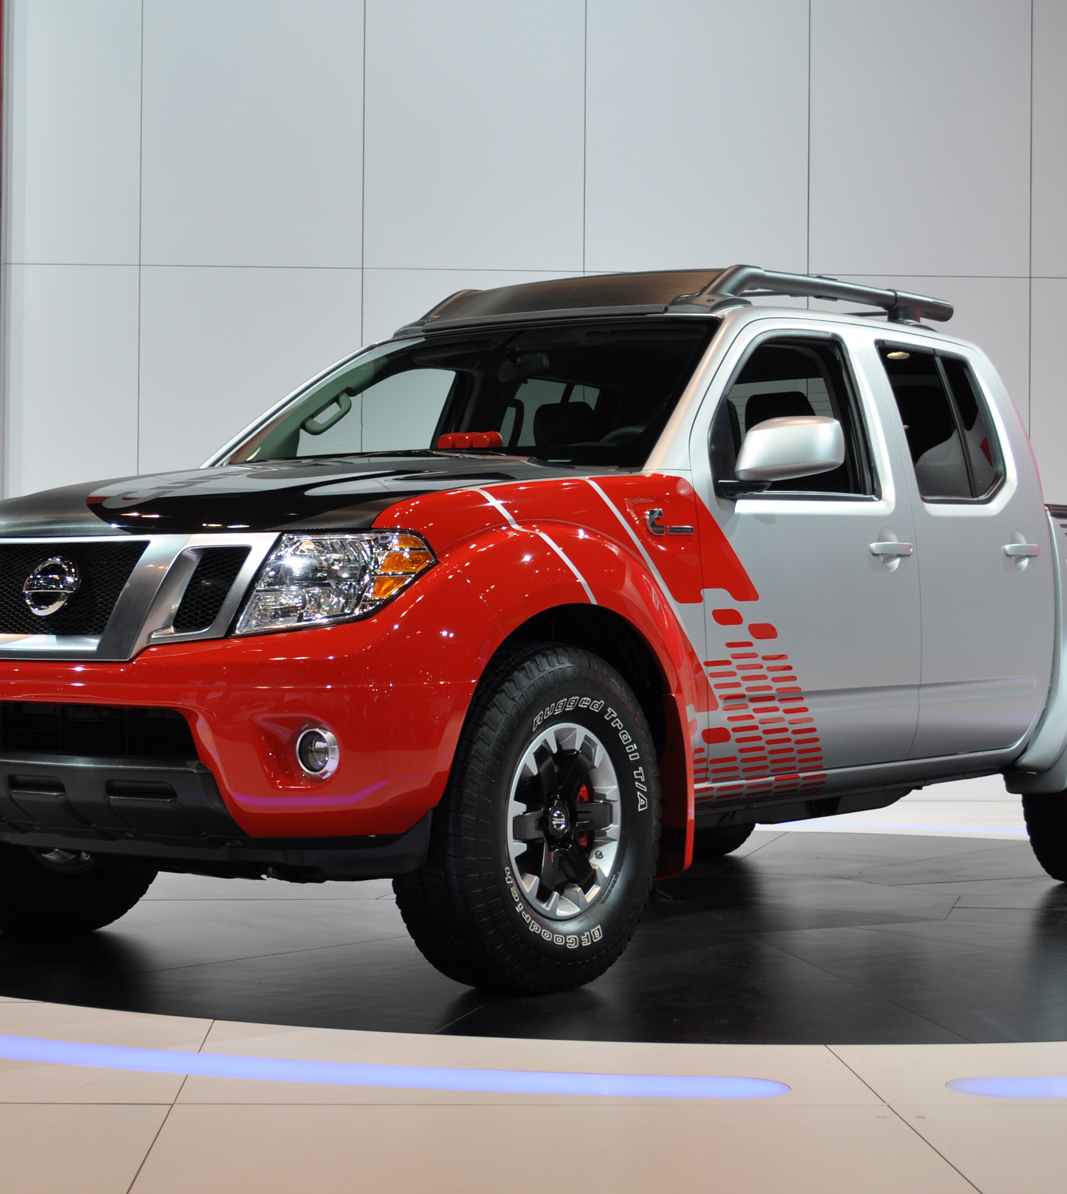 Nissan considers diesel engine for Frontier